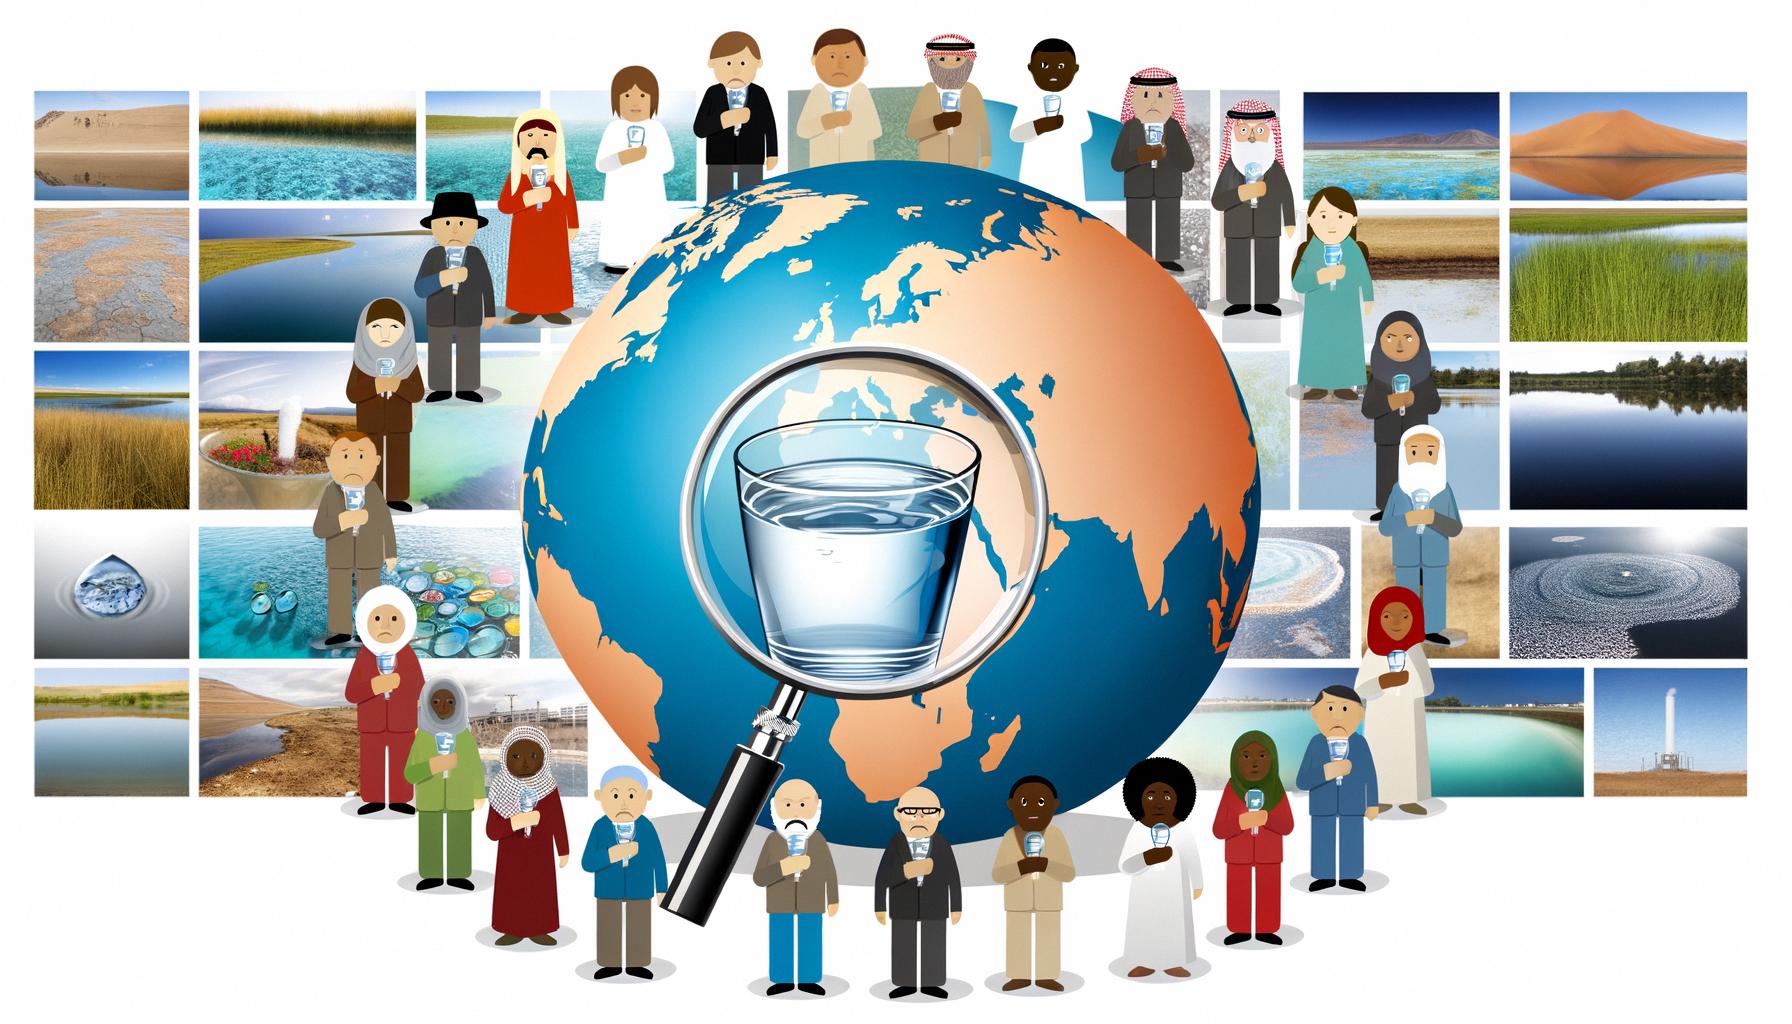 Increasing concerns over water contamination affecting health globally Balanced News